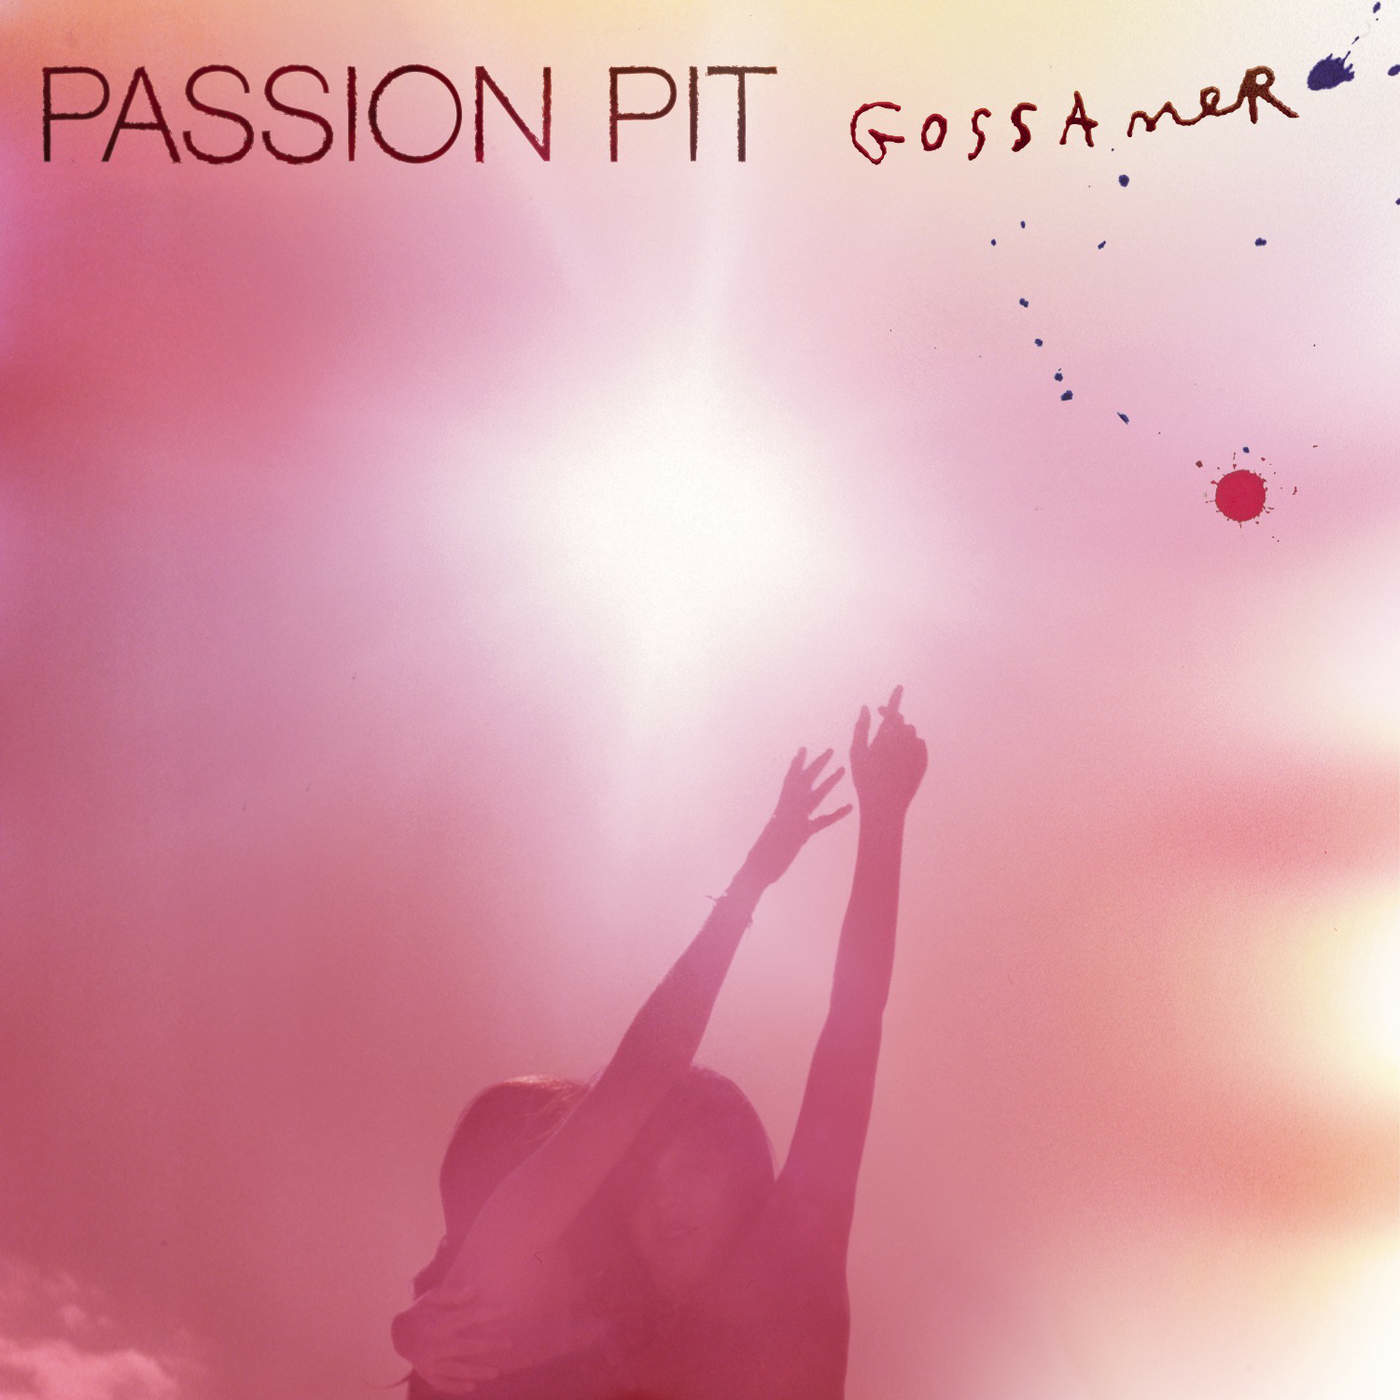 Art for Take a Walk by Passion Pit